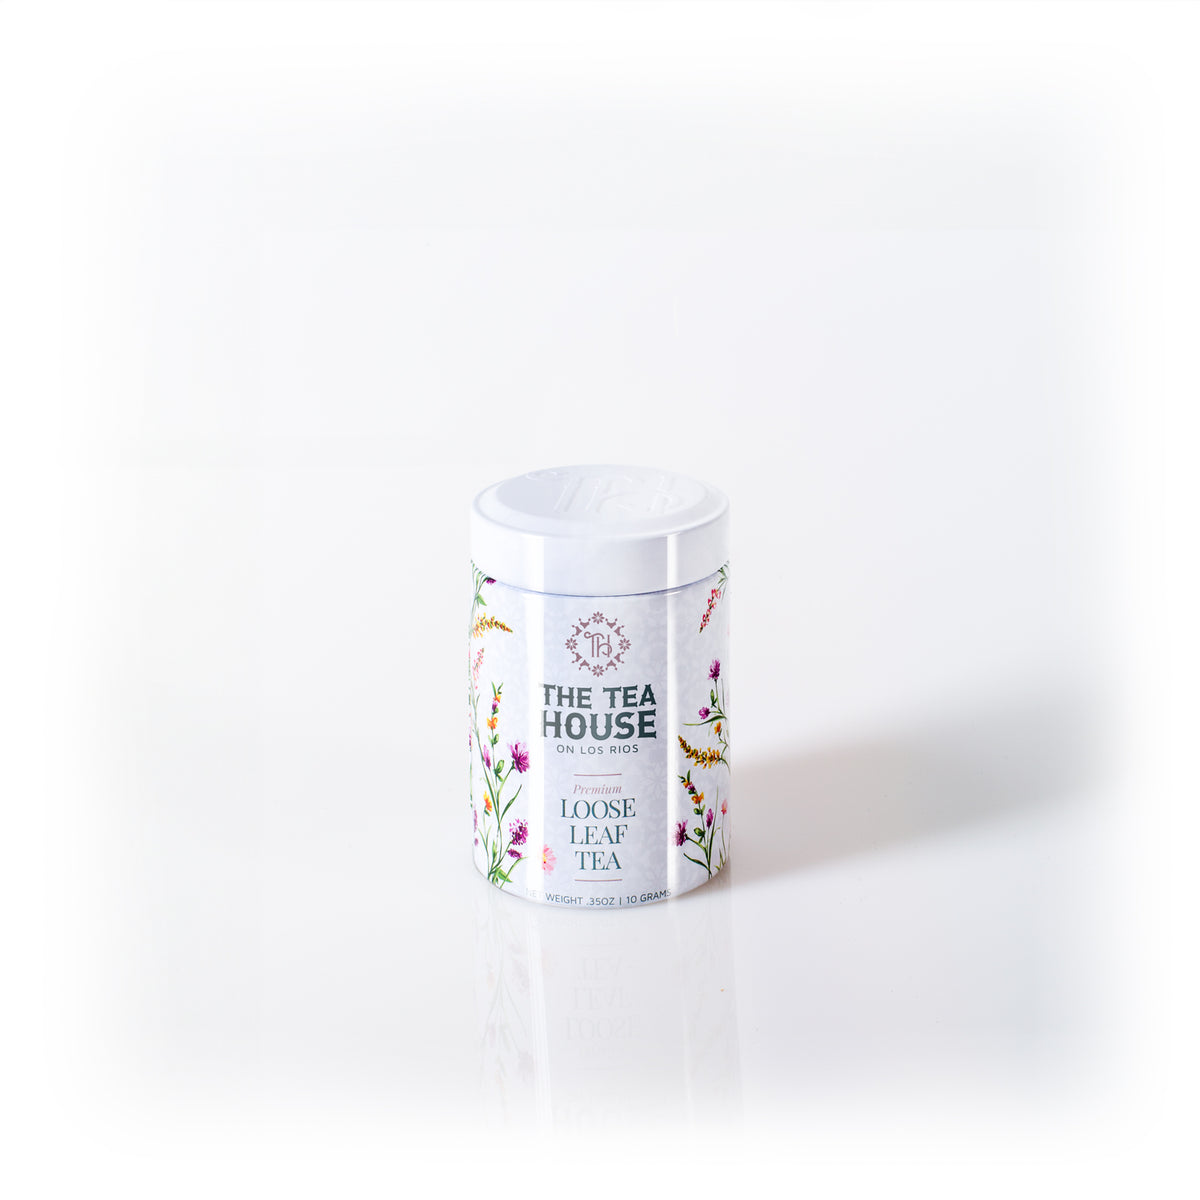 Explore The Tea House on Los Rios with this NEW 10g Loose Leaf Tea Tin